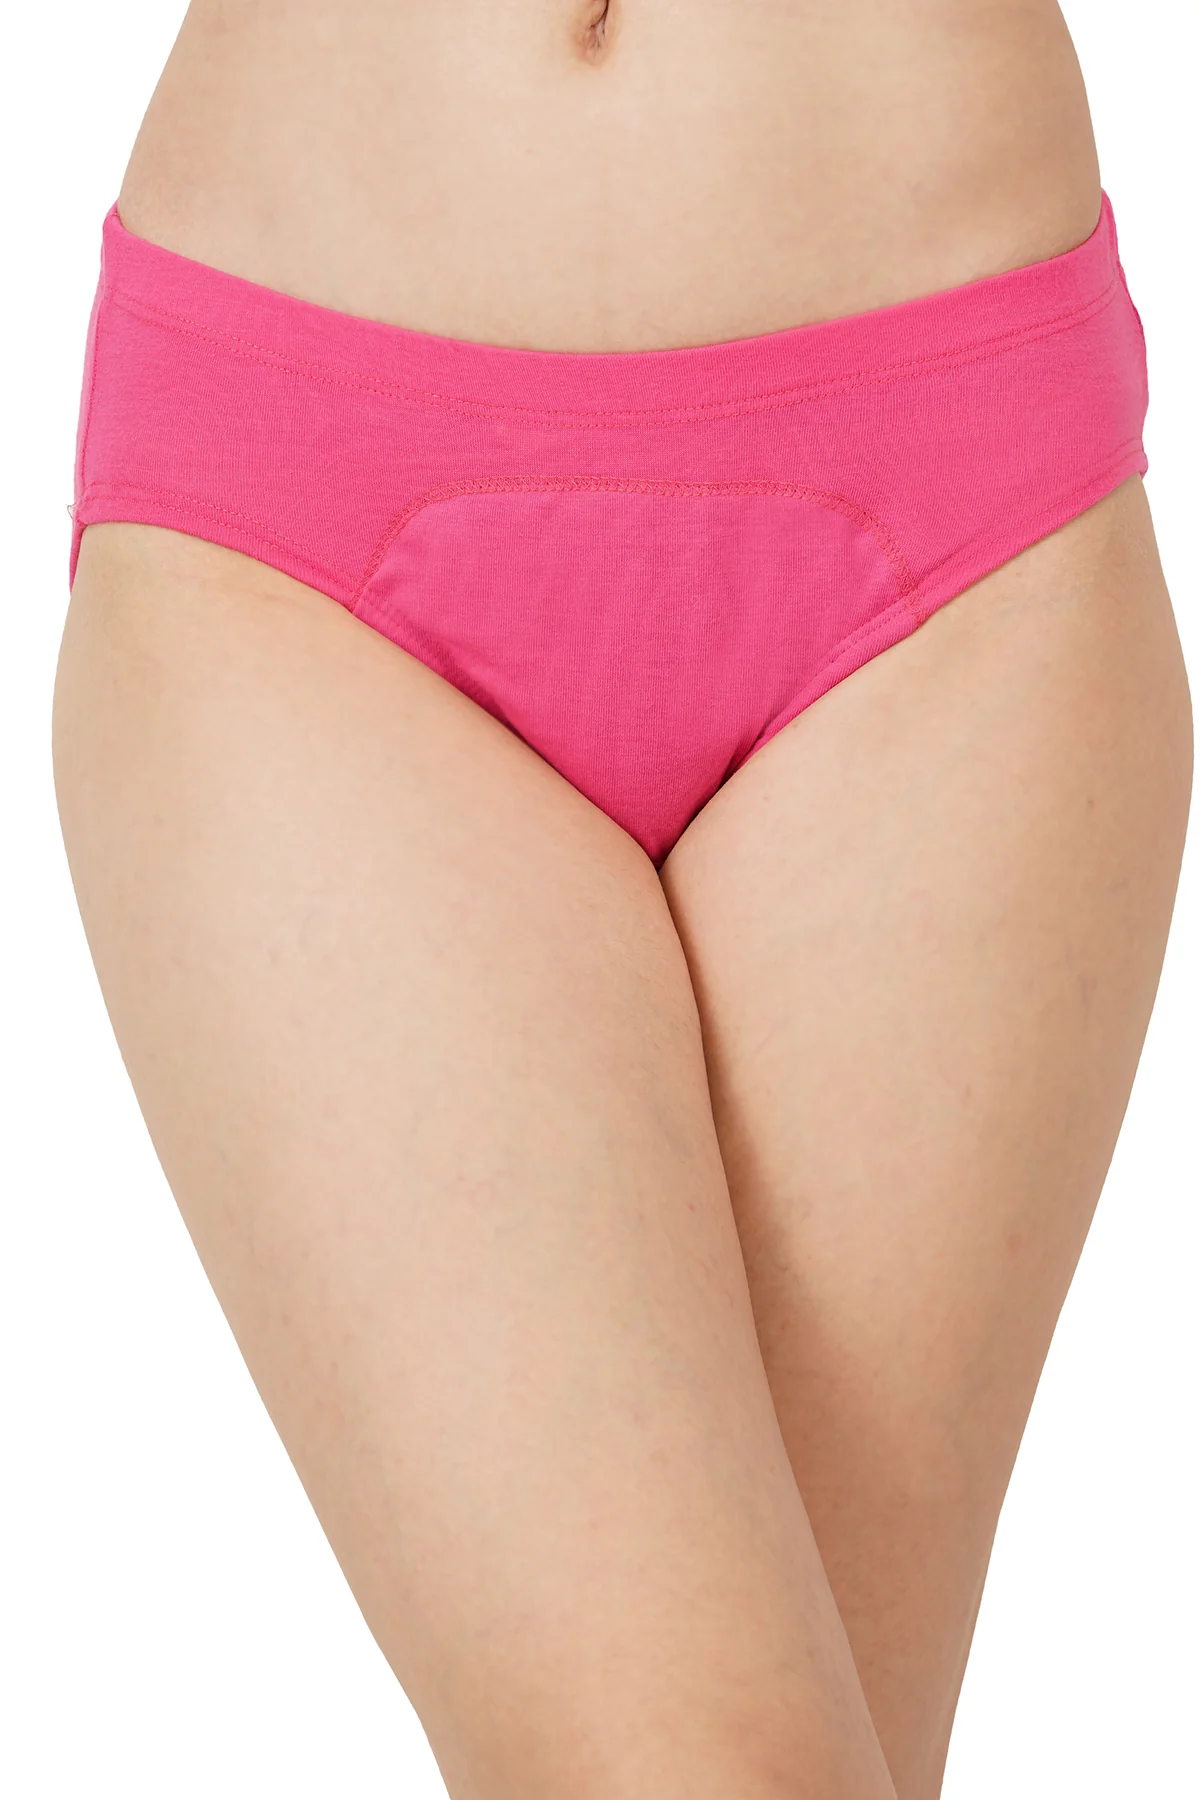 Product: Bamboo Fabric Pad Free Menstrual/Period Panty | Size S